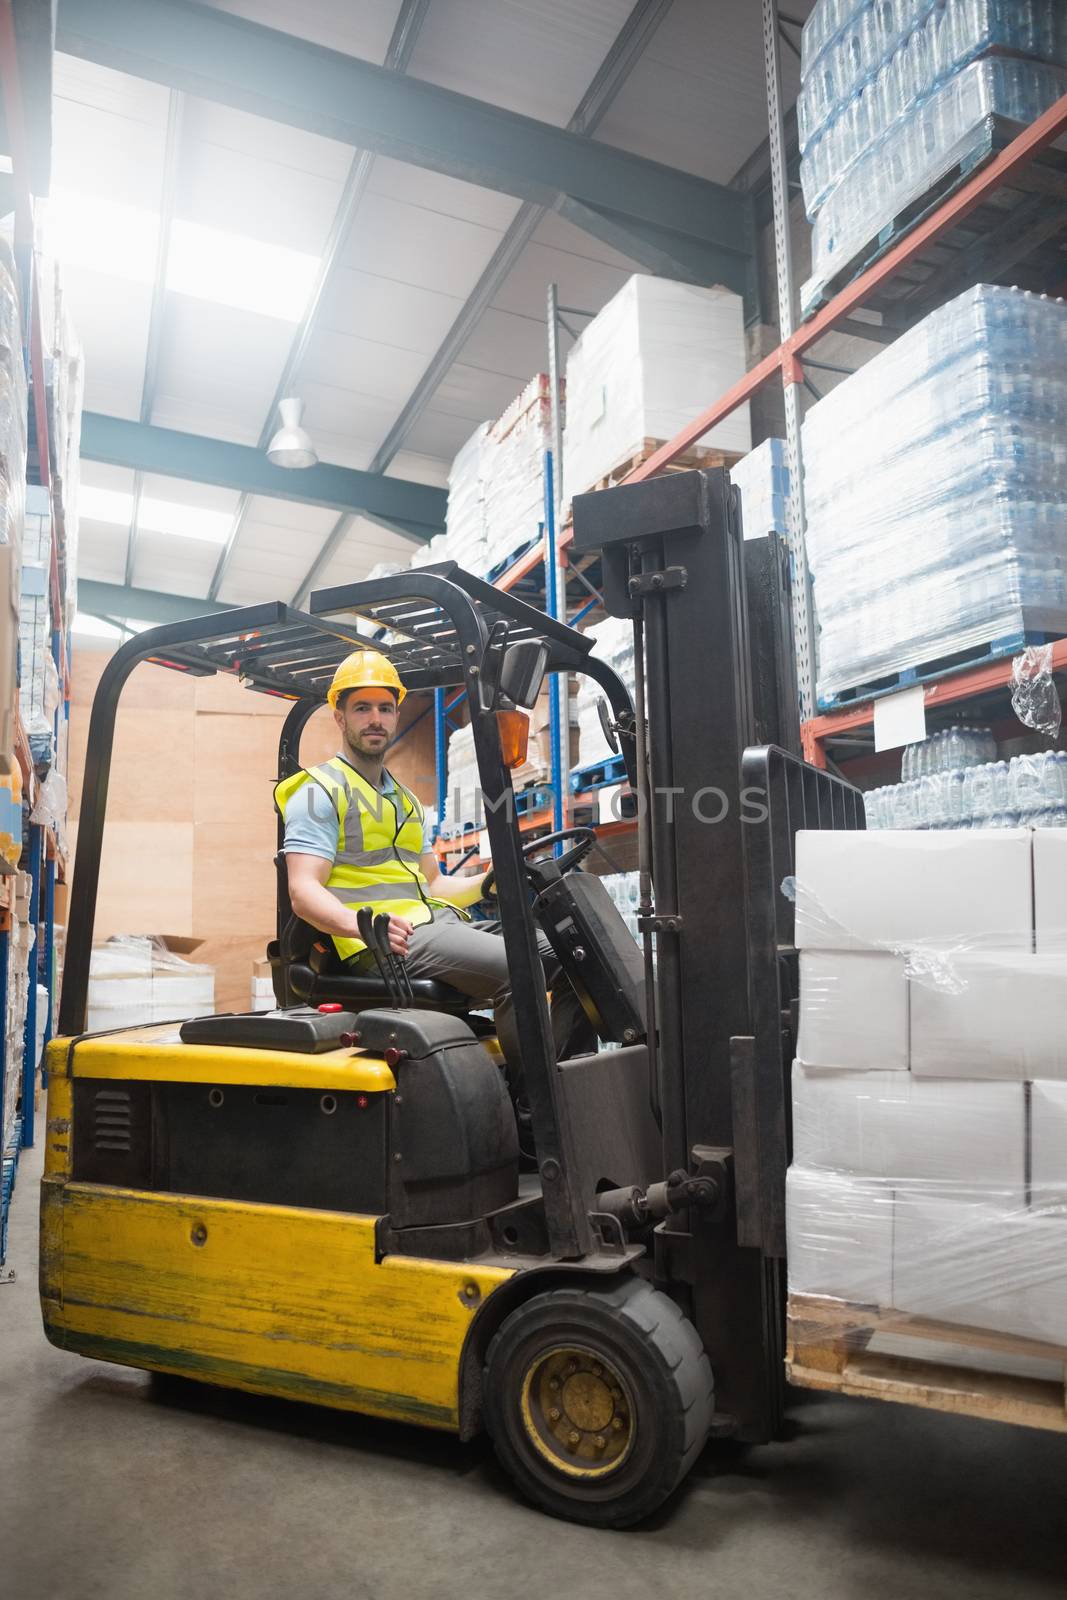 Smiling driver operating forklift machine by Wavebreakmedia